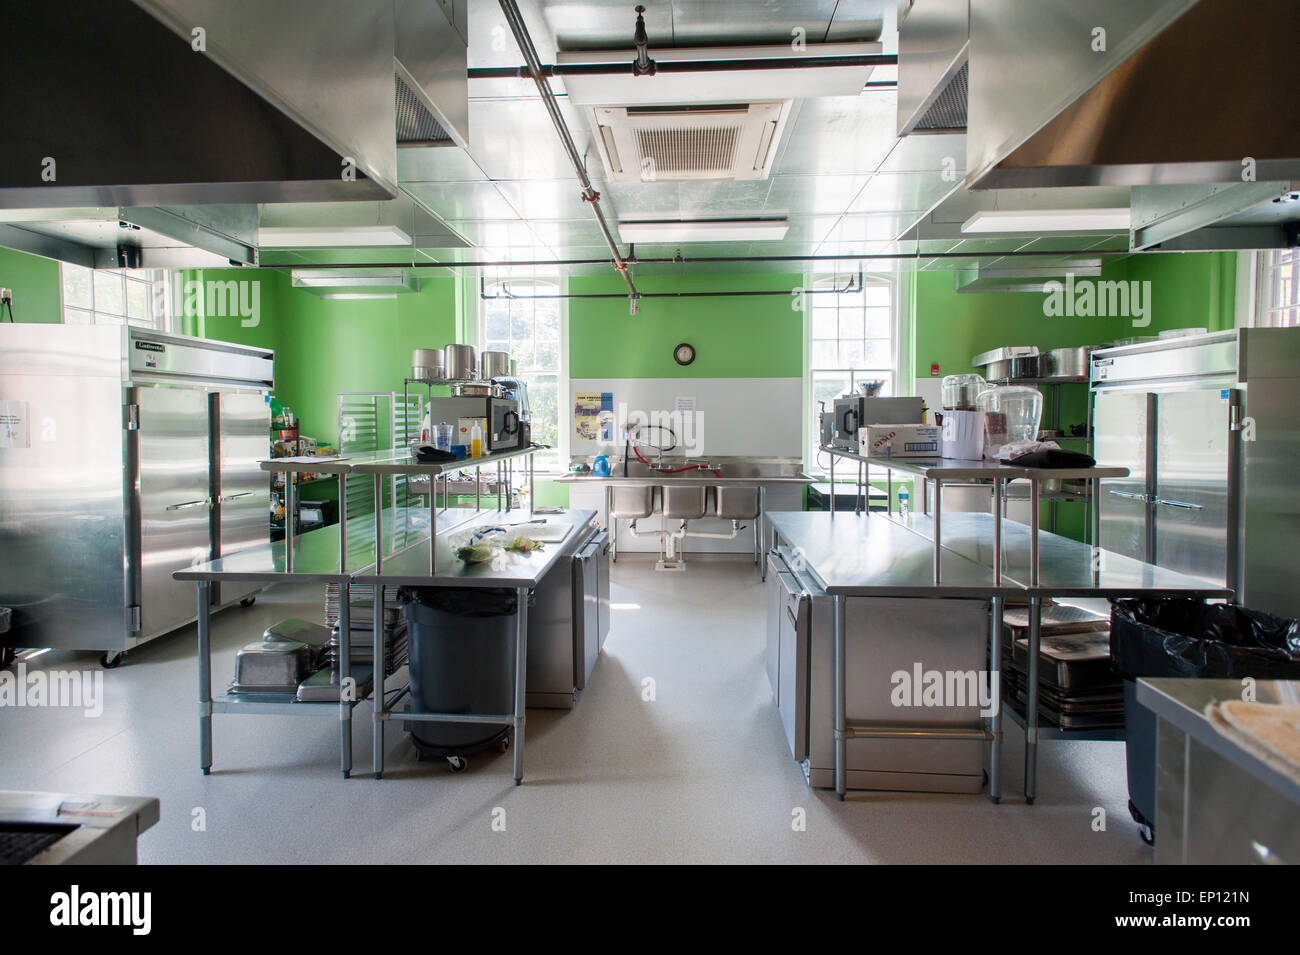 Institutional kitchen with bright green painted walls and stainless steel fixtures in Denton, Maryland, USA Stock Photo